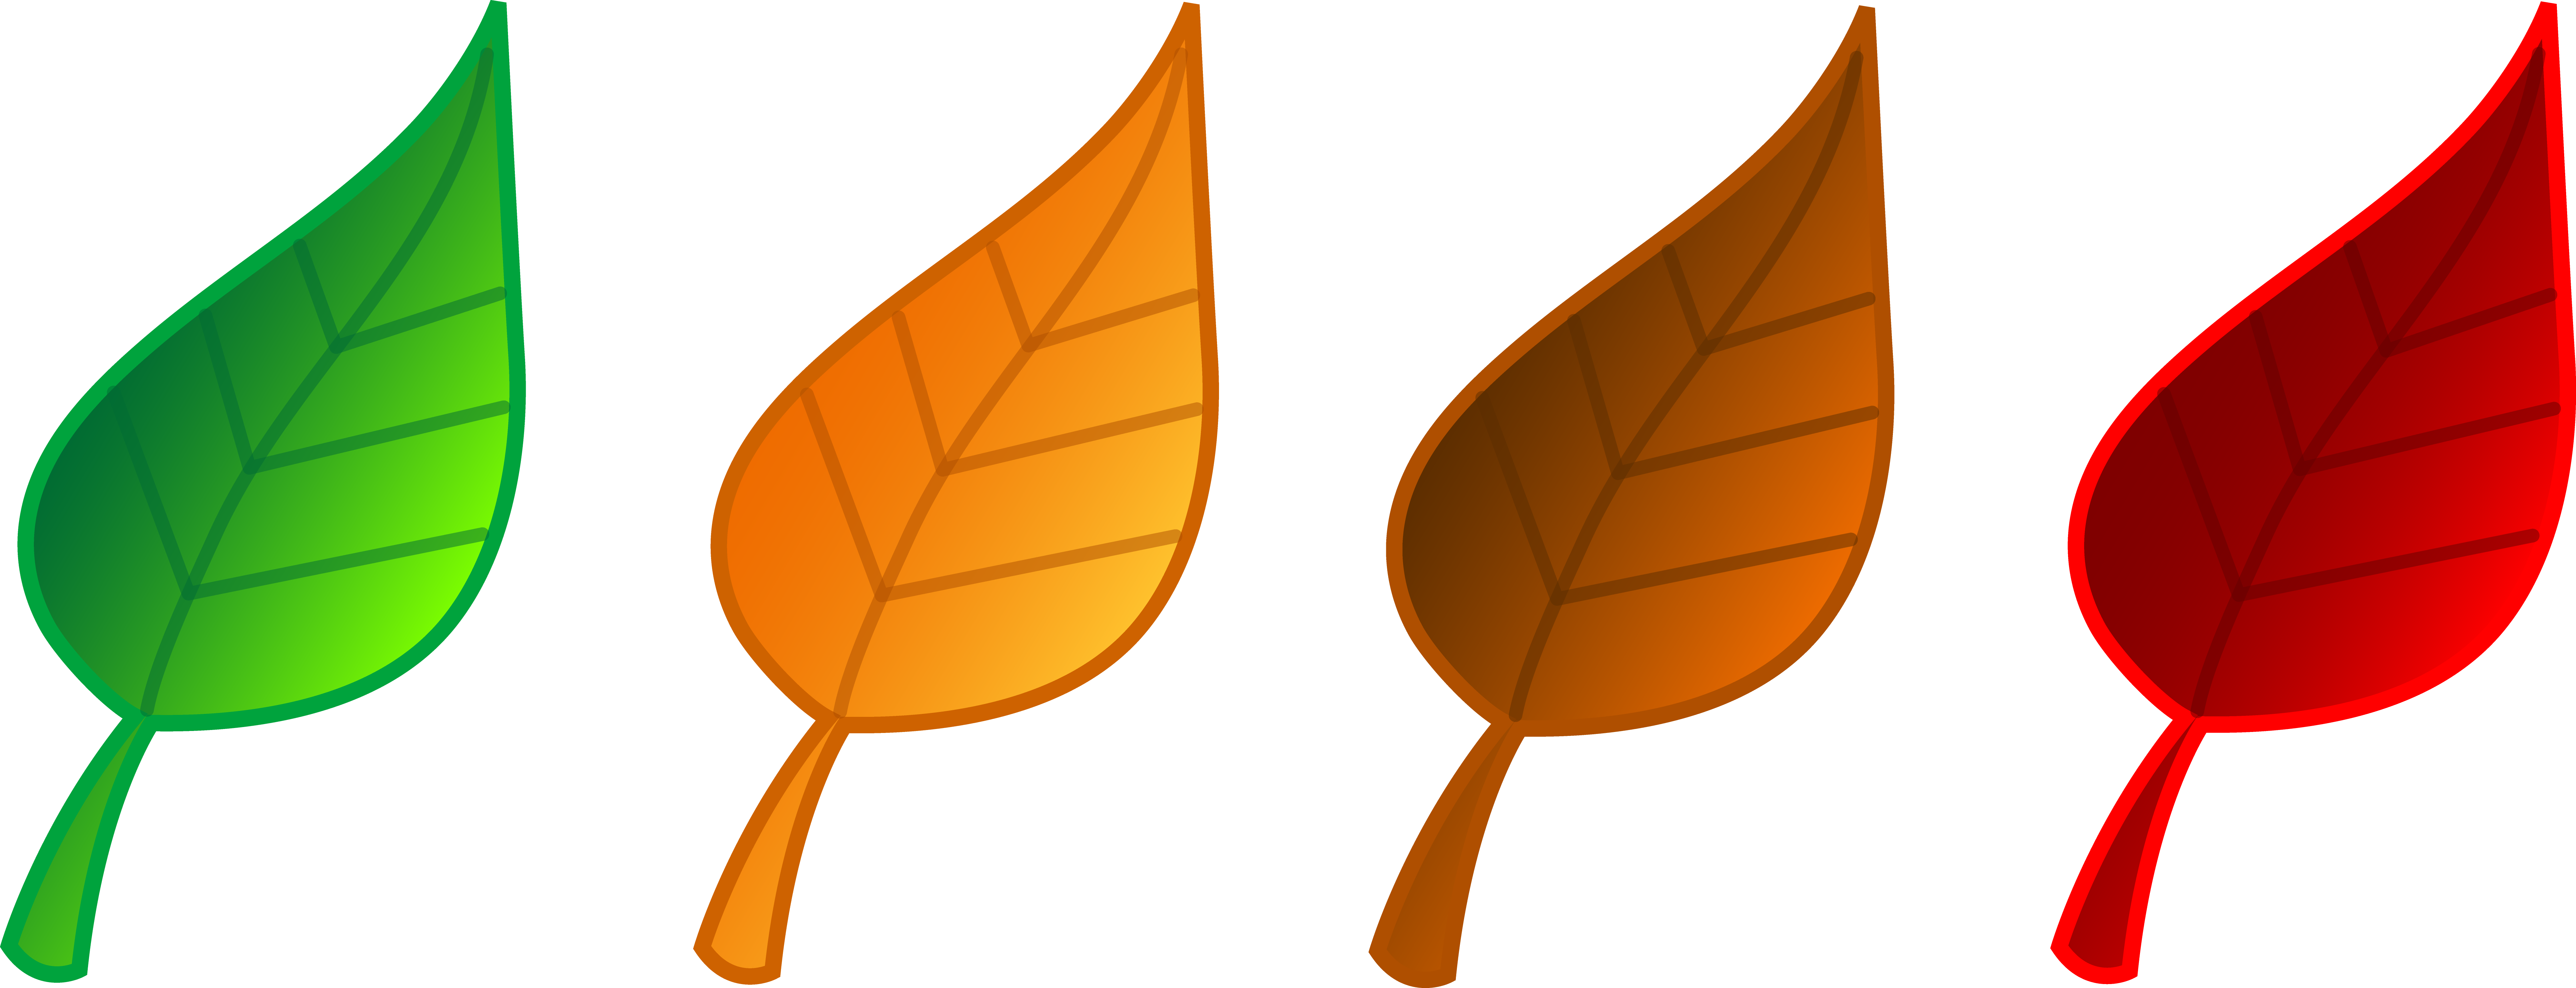 clipart for leaves - photo #43